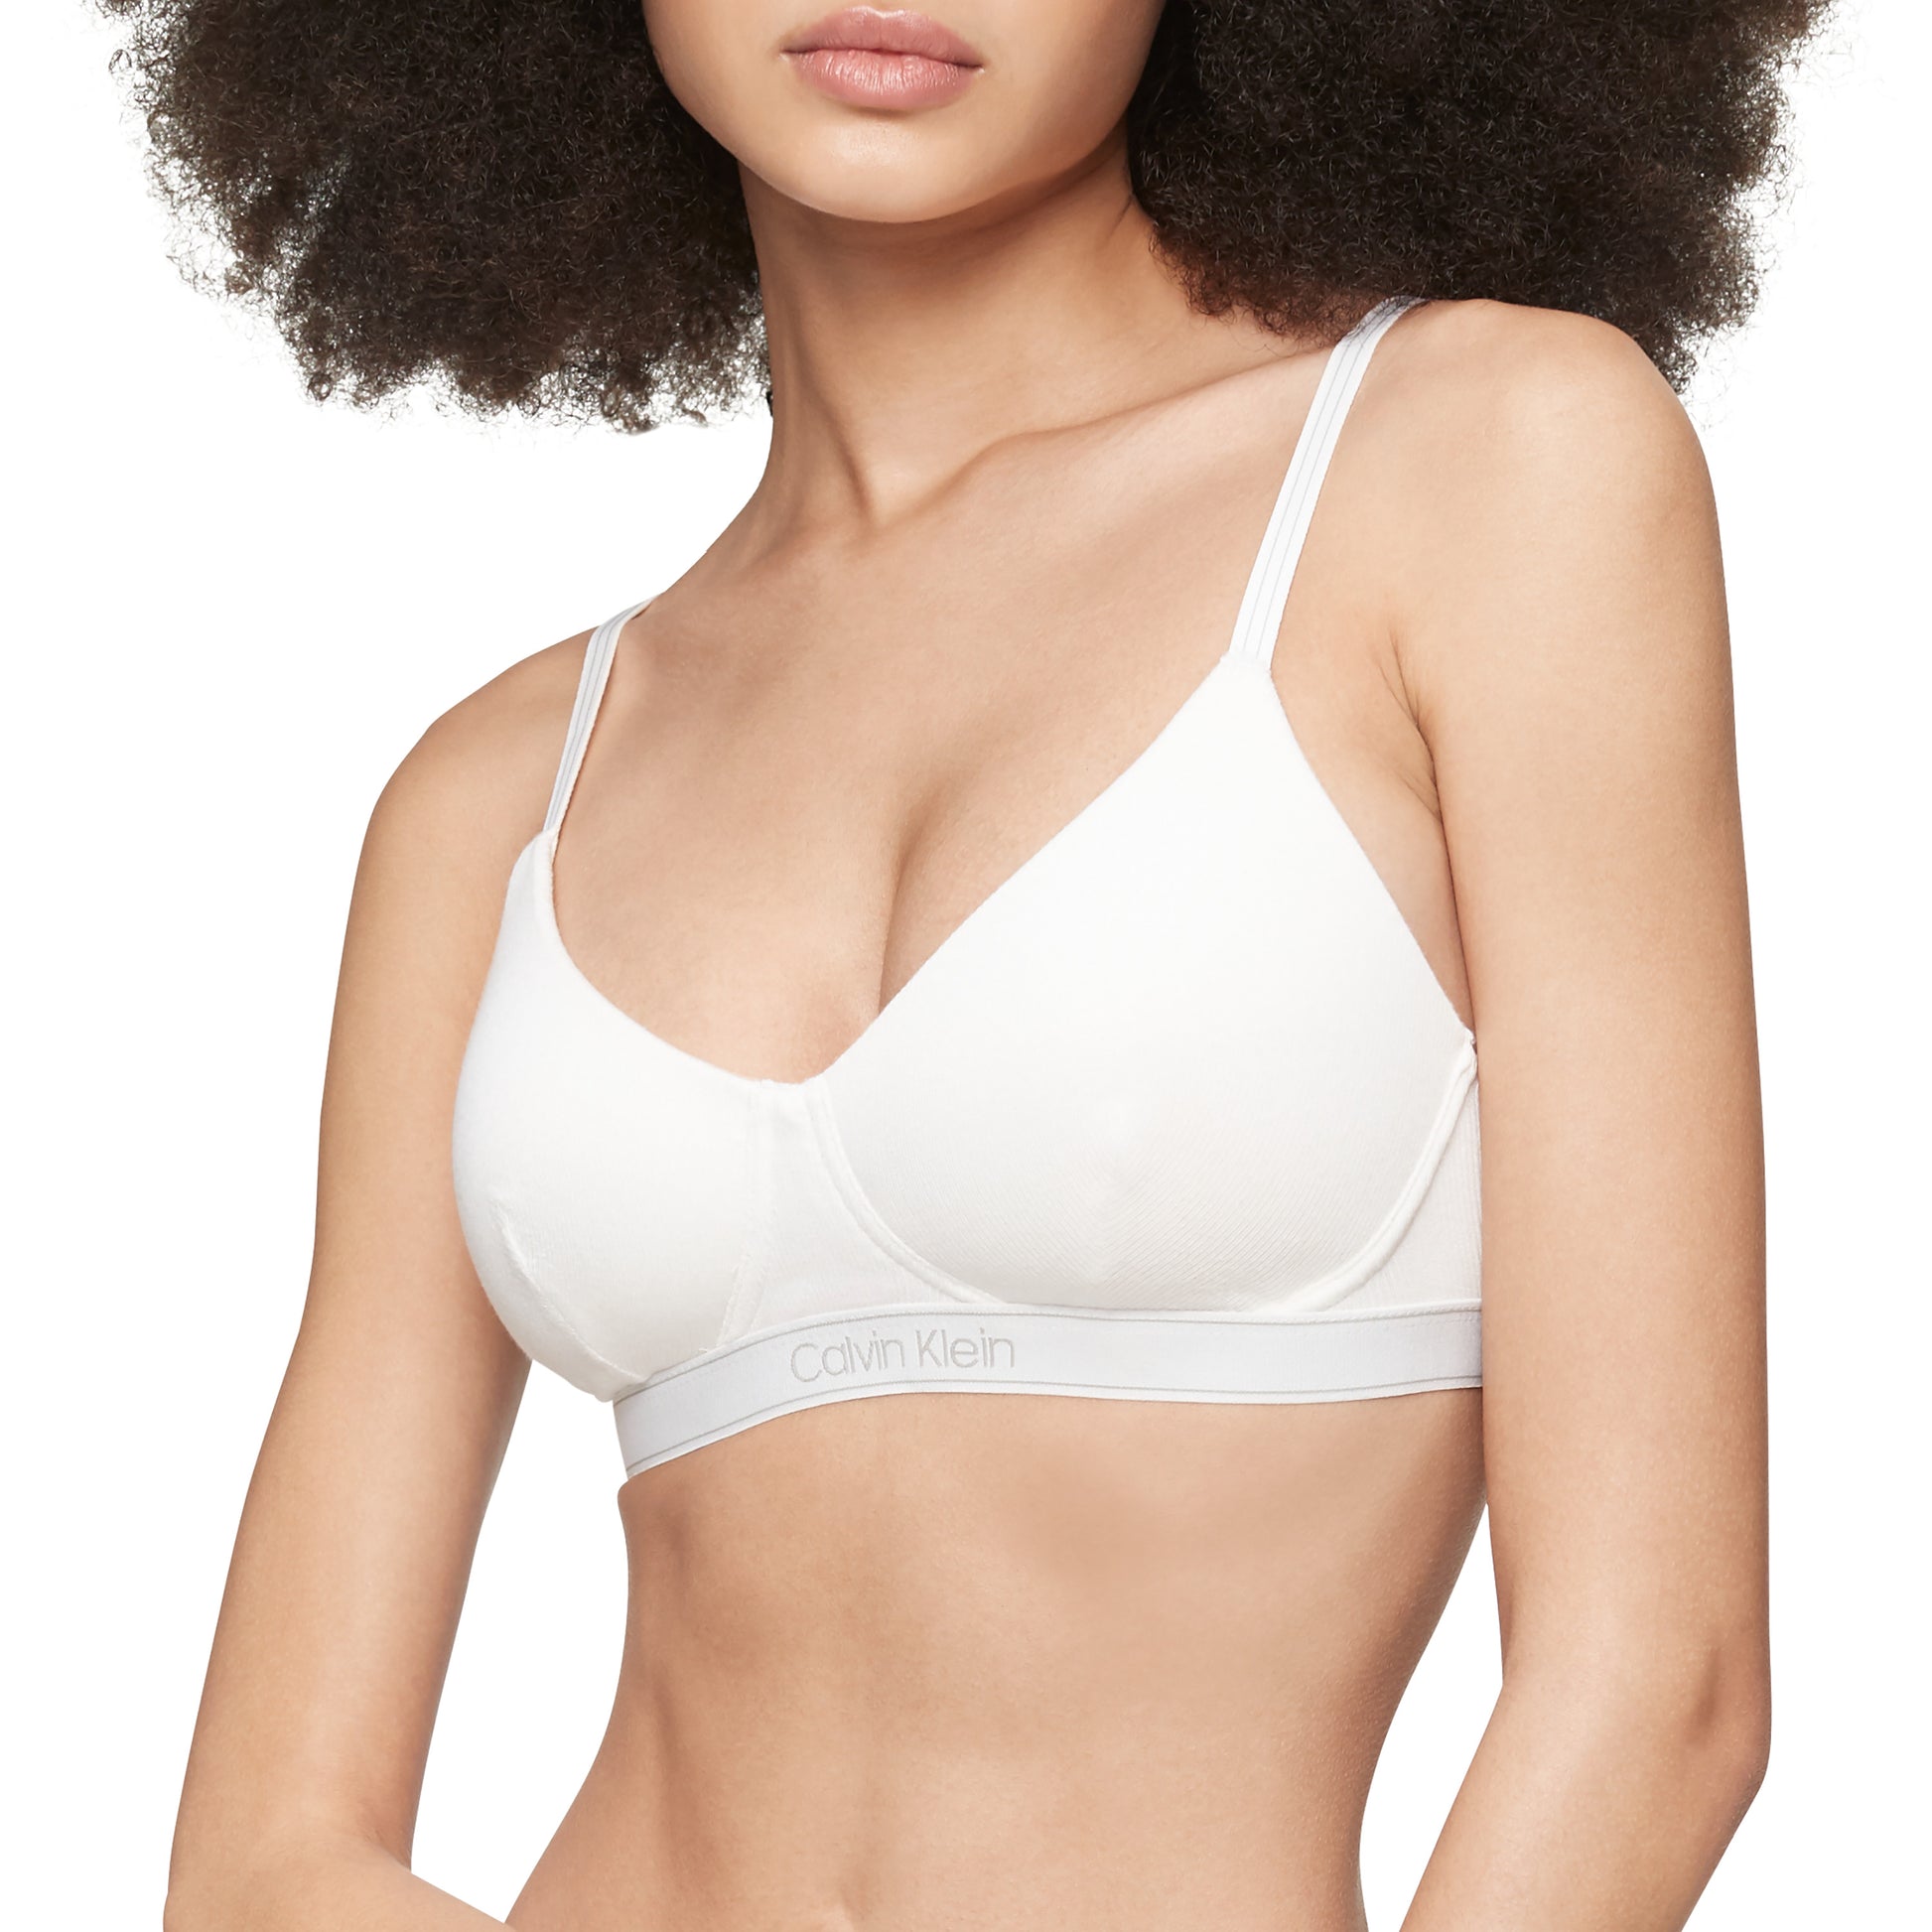 Calvin Klein Pure Ribbed Unlined Bralette Rebellious QF6438 - Free